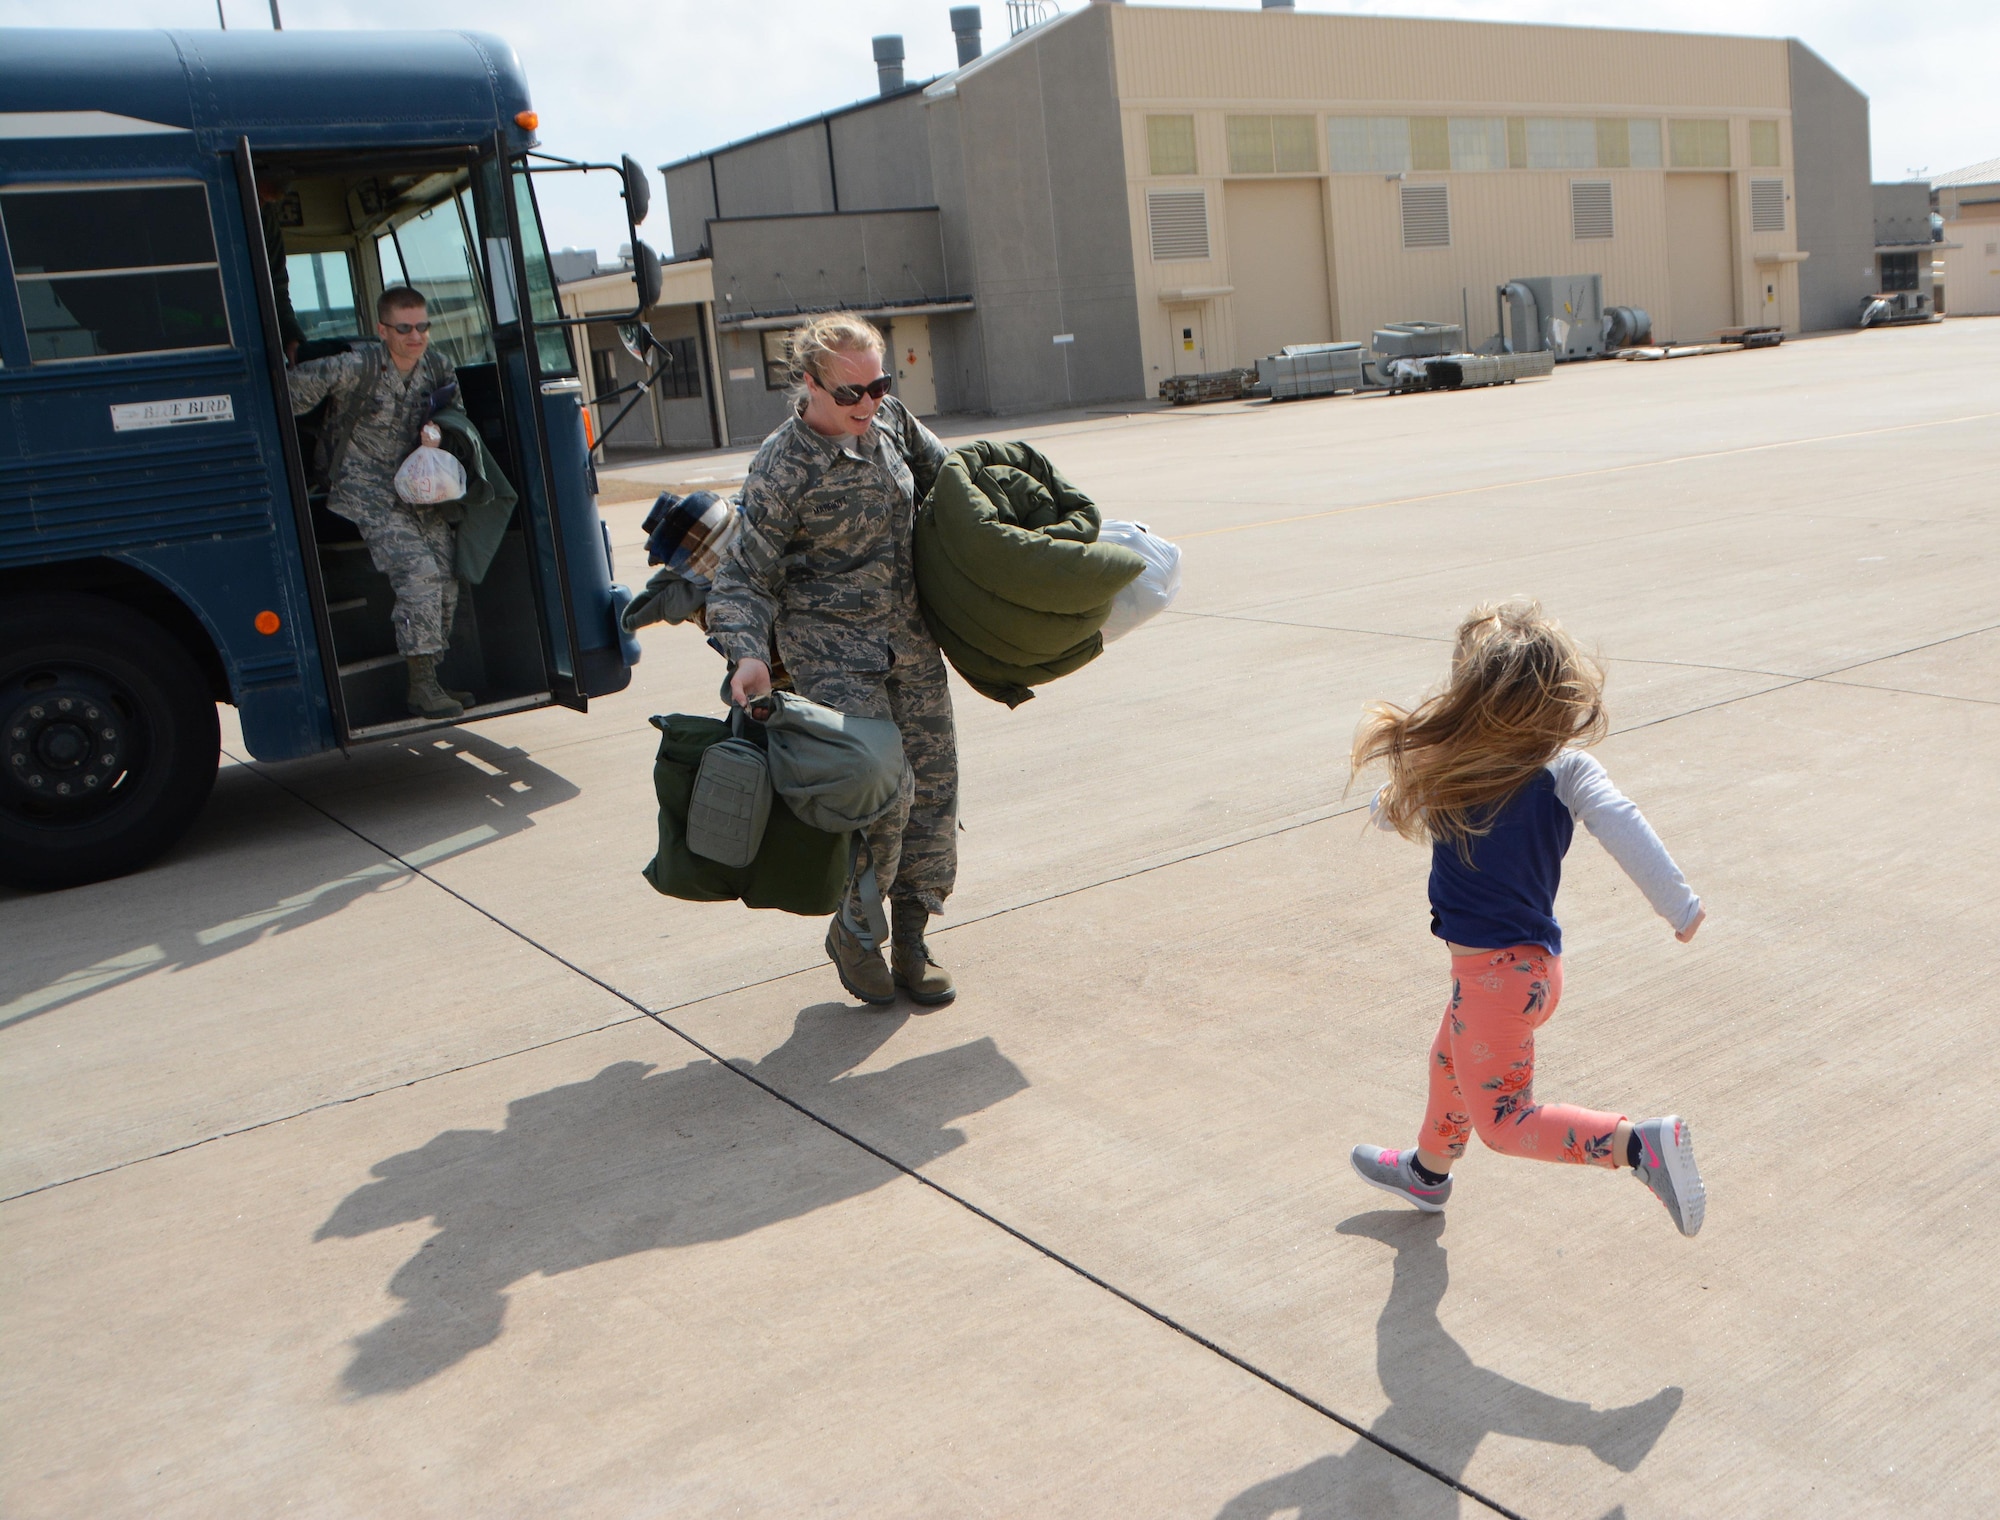 Staff Sgt. Morgan Marriott of the 507th Maintenance Squadron opens her arms to greet her daughter following a deployment Feb. 19, 2017, at Tinker Air Force Base, Okla. More than 90 Reservists deployed in December 2016 in support of air operations at Incirlik Air Base, Turkey, against the Islamic State group. (U.S. Air Force photo/Tech. Sgt. Lauren Gleason)